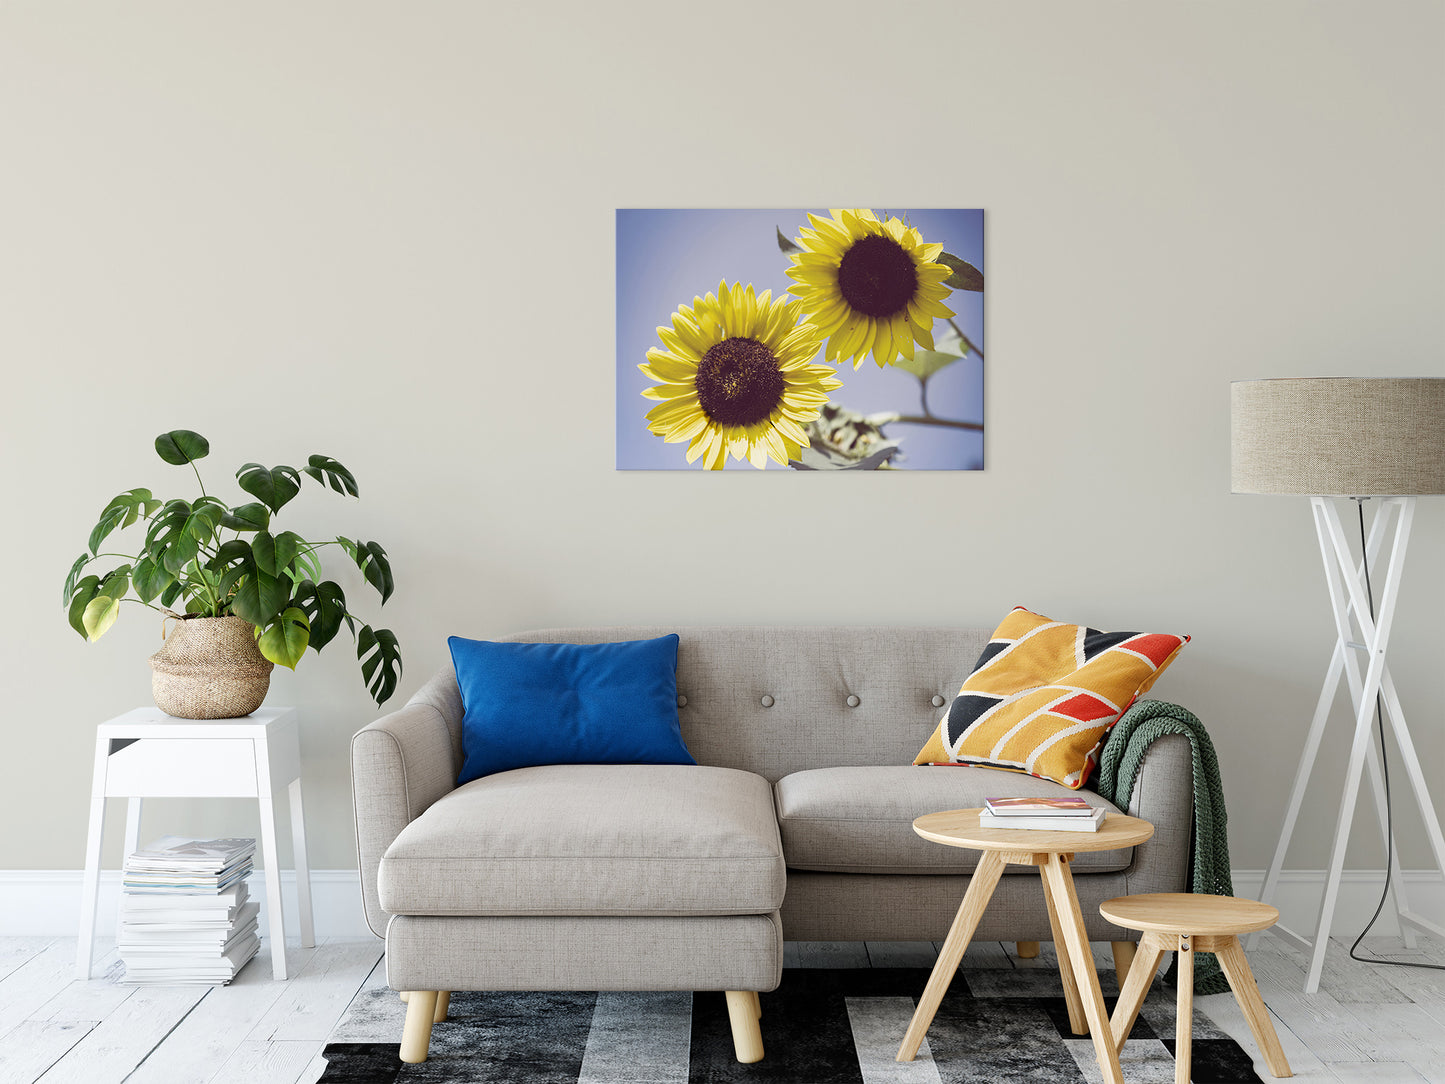 Vintage Floral Wall Art: Aged Sunflowers Against Sky Floral / Nature Fine Art Canvas Wall Art Prints 24" x 36" - PIPAFINEART